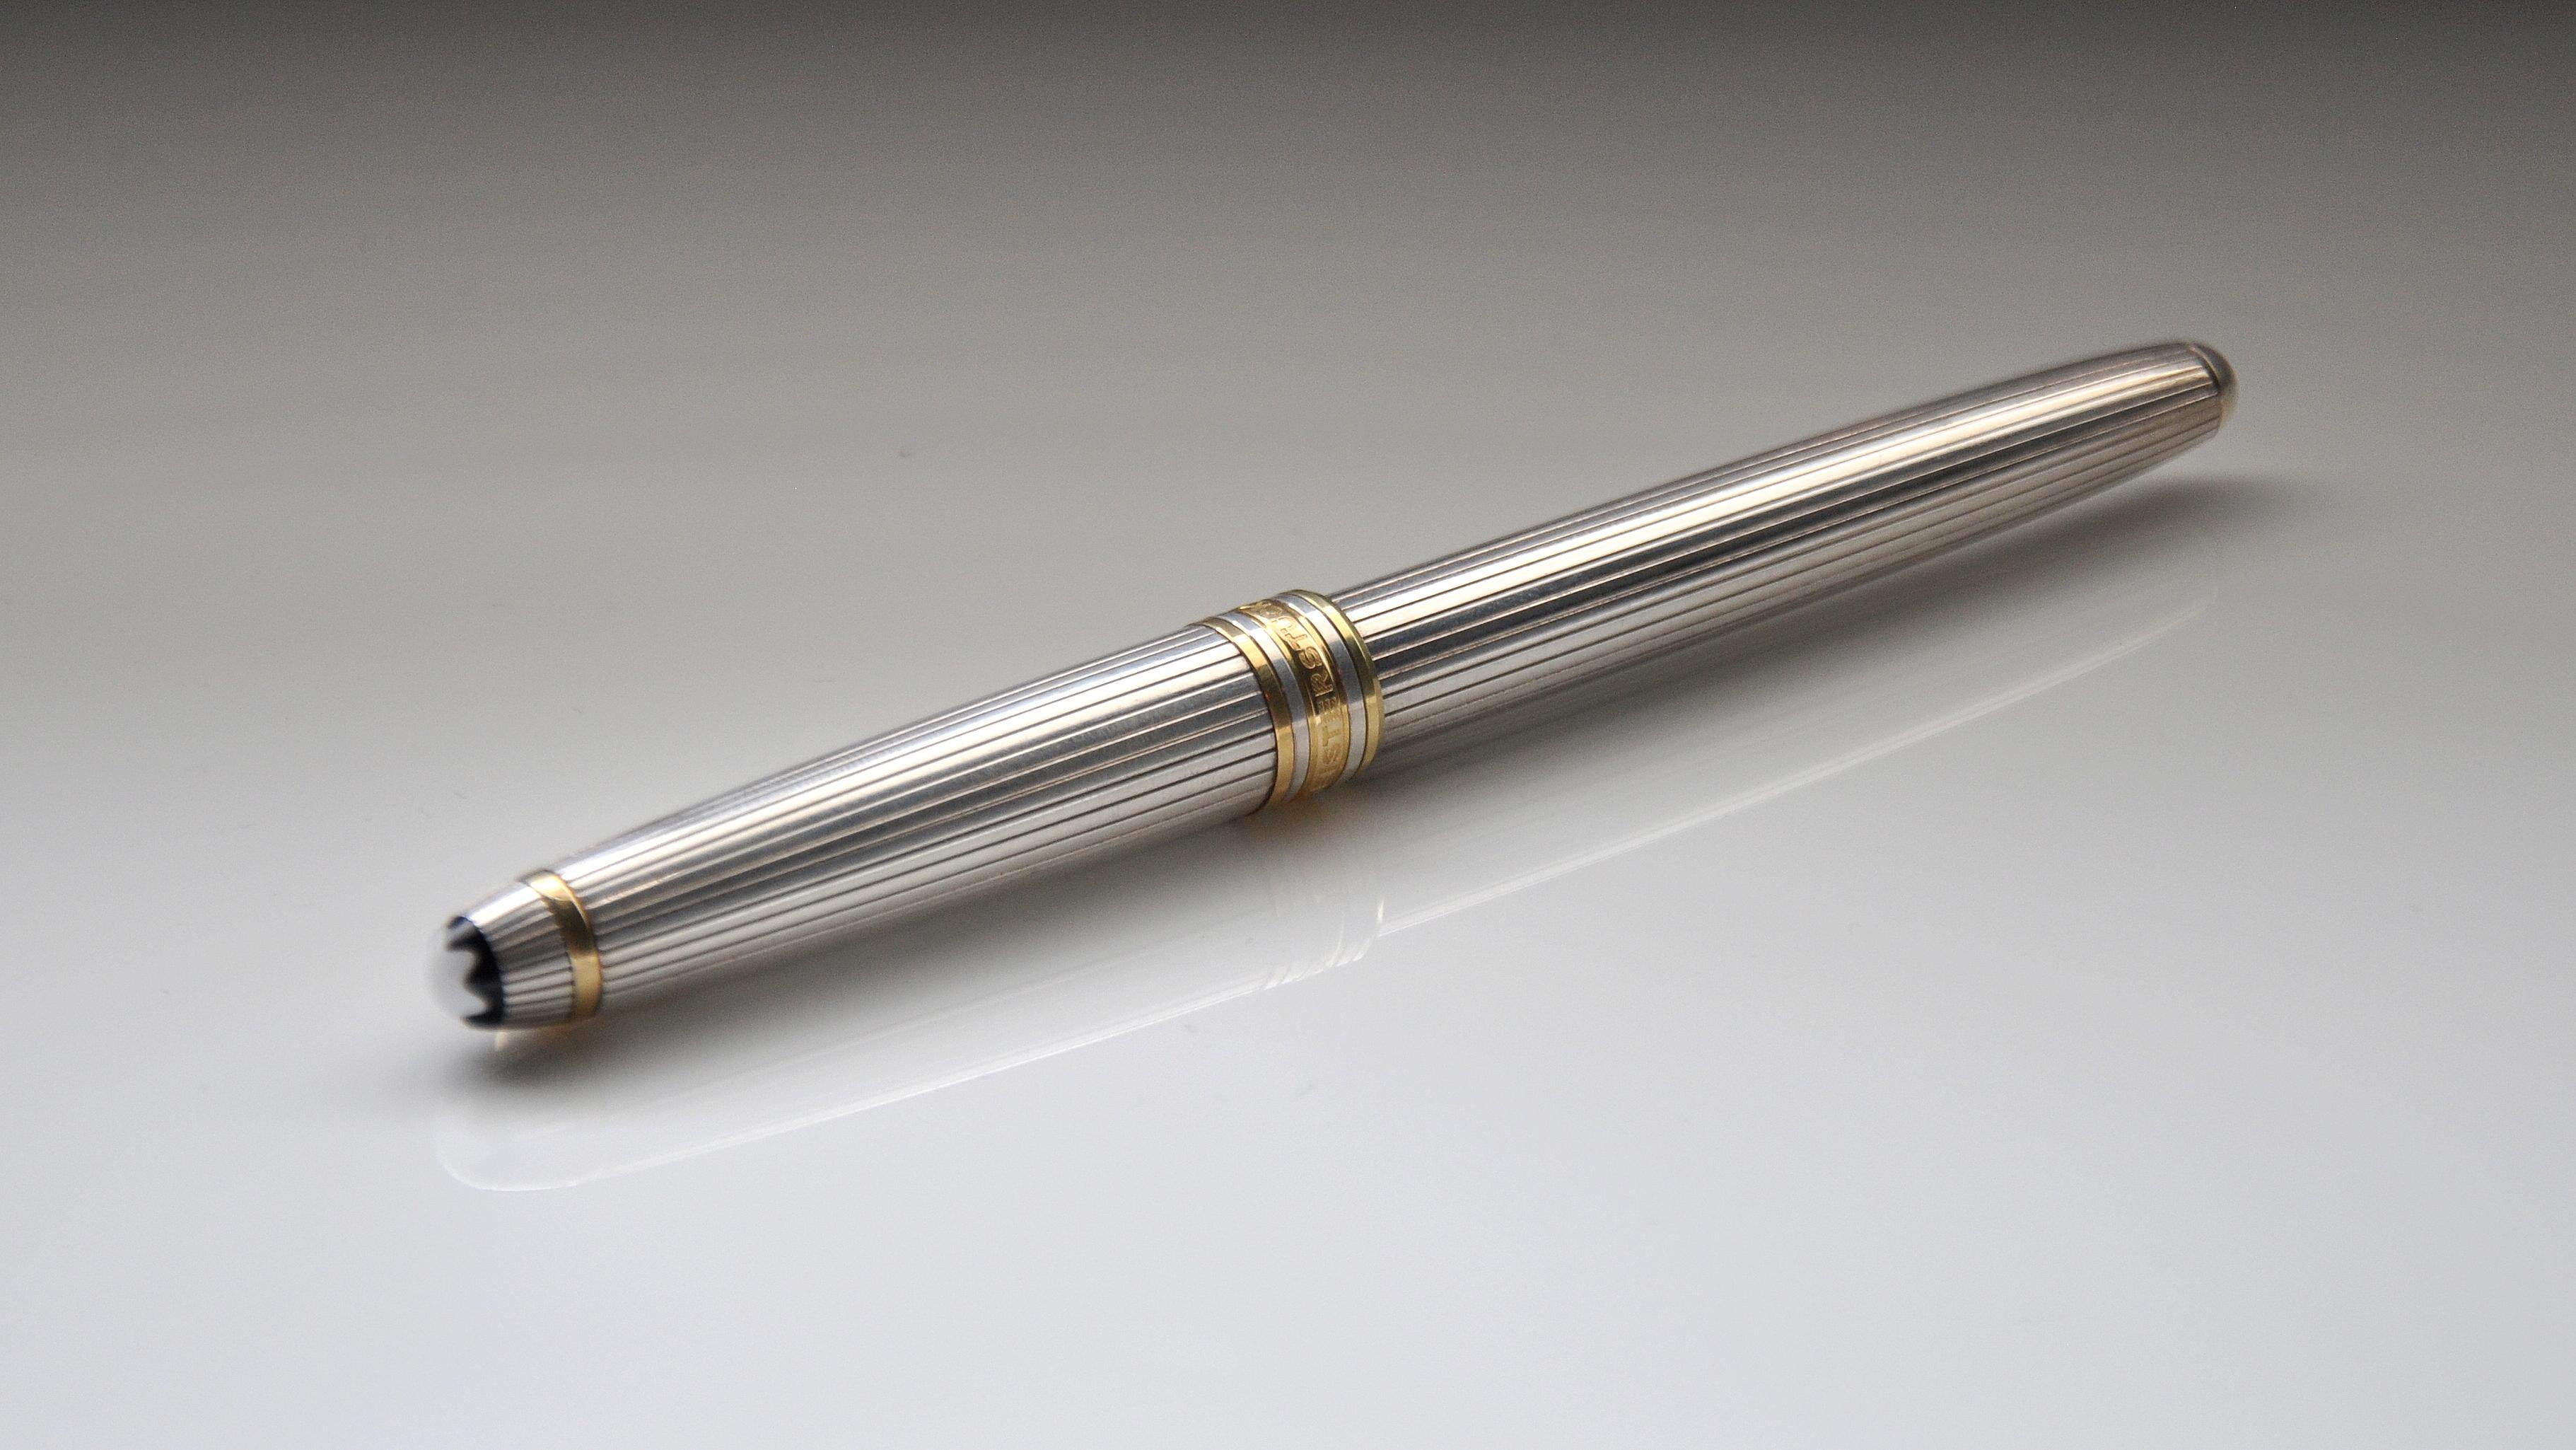 A vintage 925 silver Montblanc Meisterstück 164 rollerball pen, in the Godron pattern. The pen's barrel and cap are made of 925 sterling silver and feature a fluted or pinstripe pattern. The 925 silver rings, clip and tip are gold-plated. The cap is